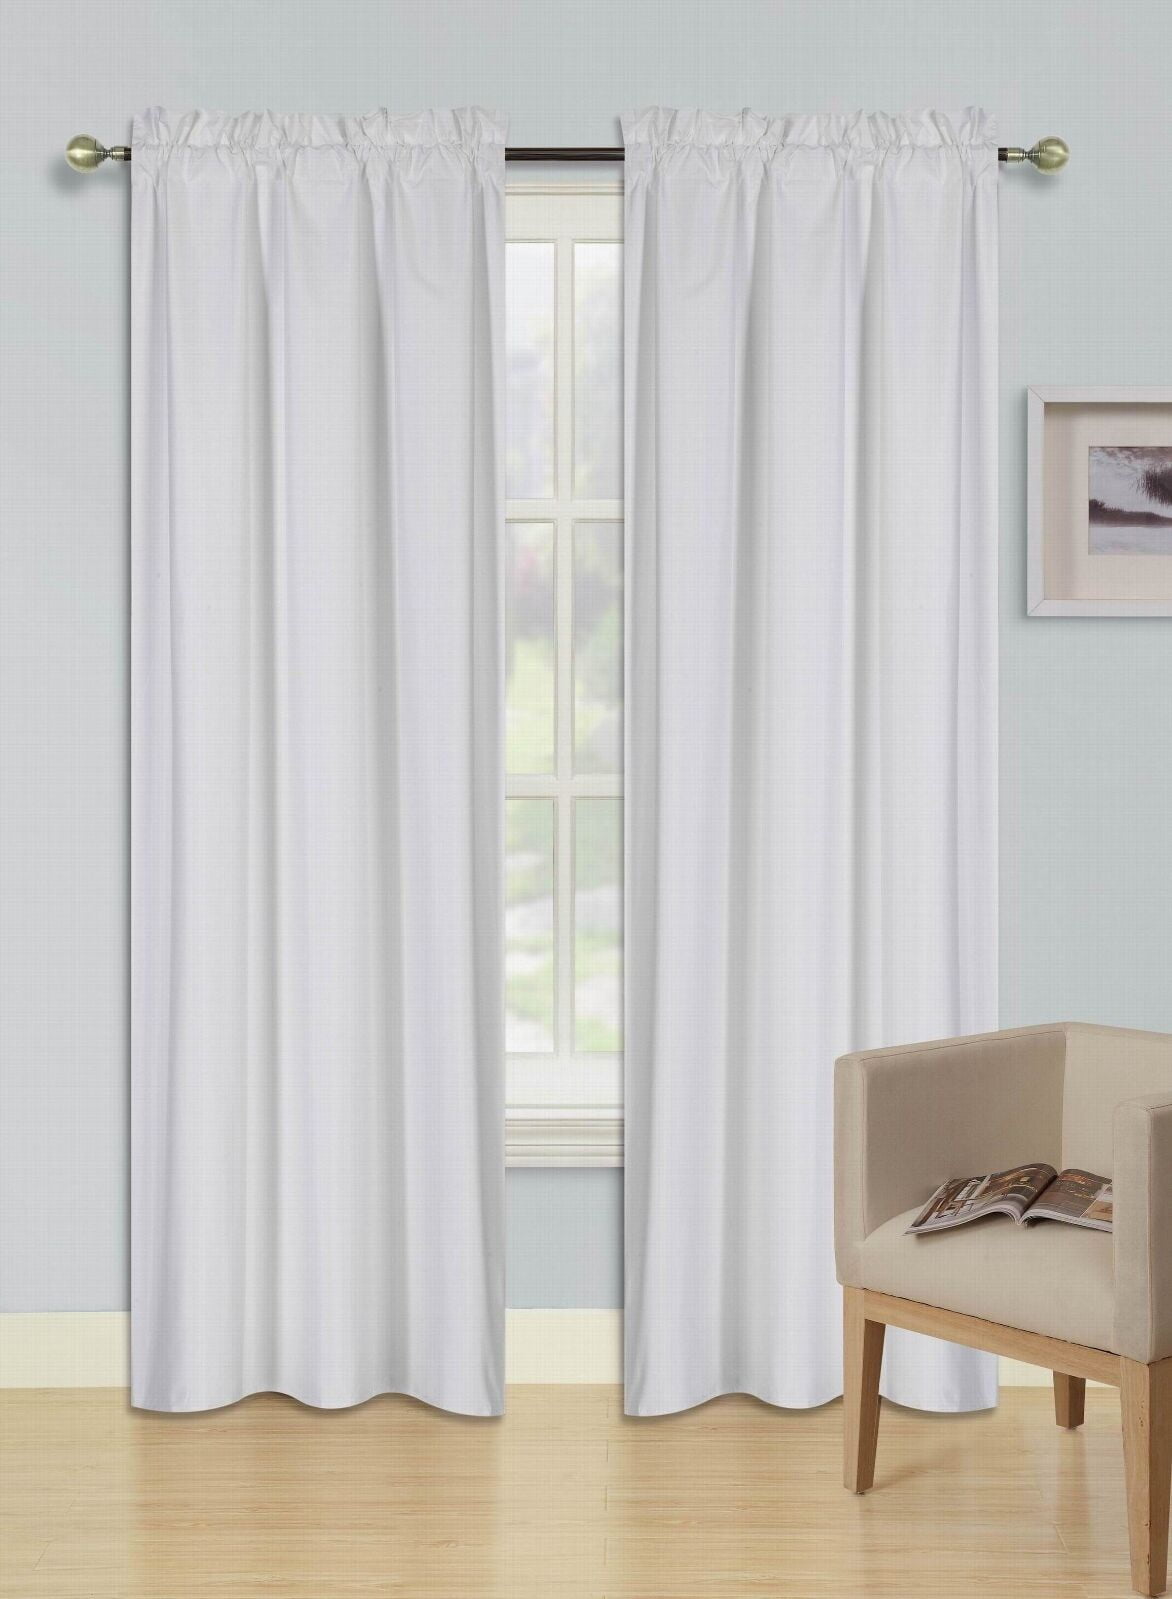 Tape Top Pencil Pleat Thermal BLACKOUT Plain Curtains to Block Sunlight 